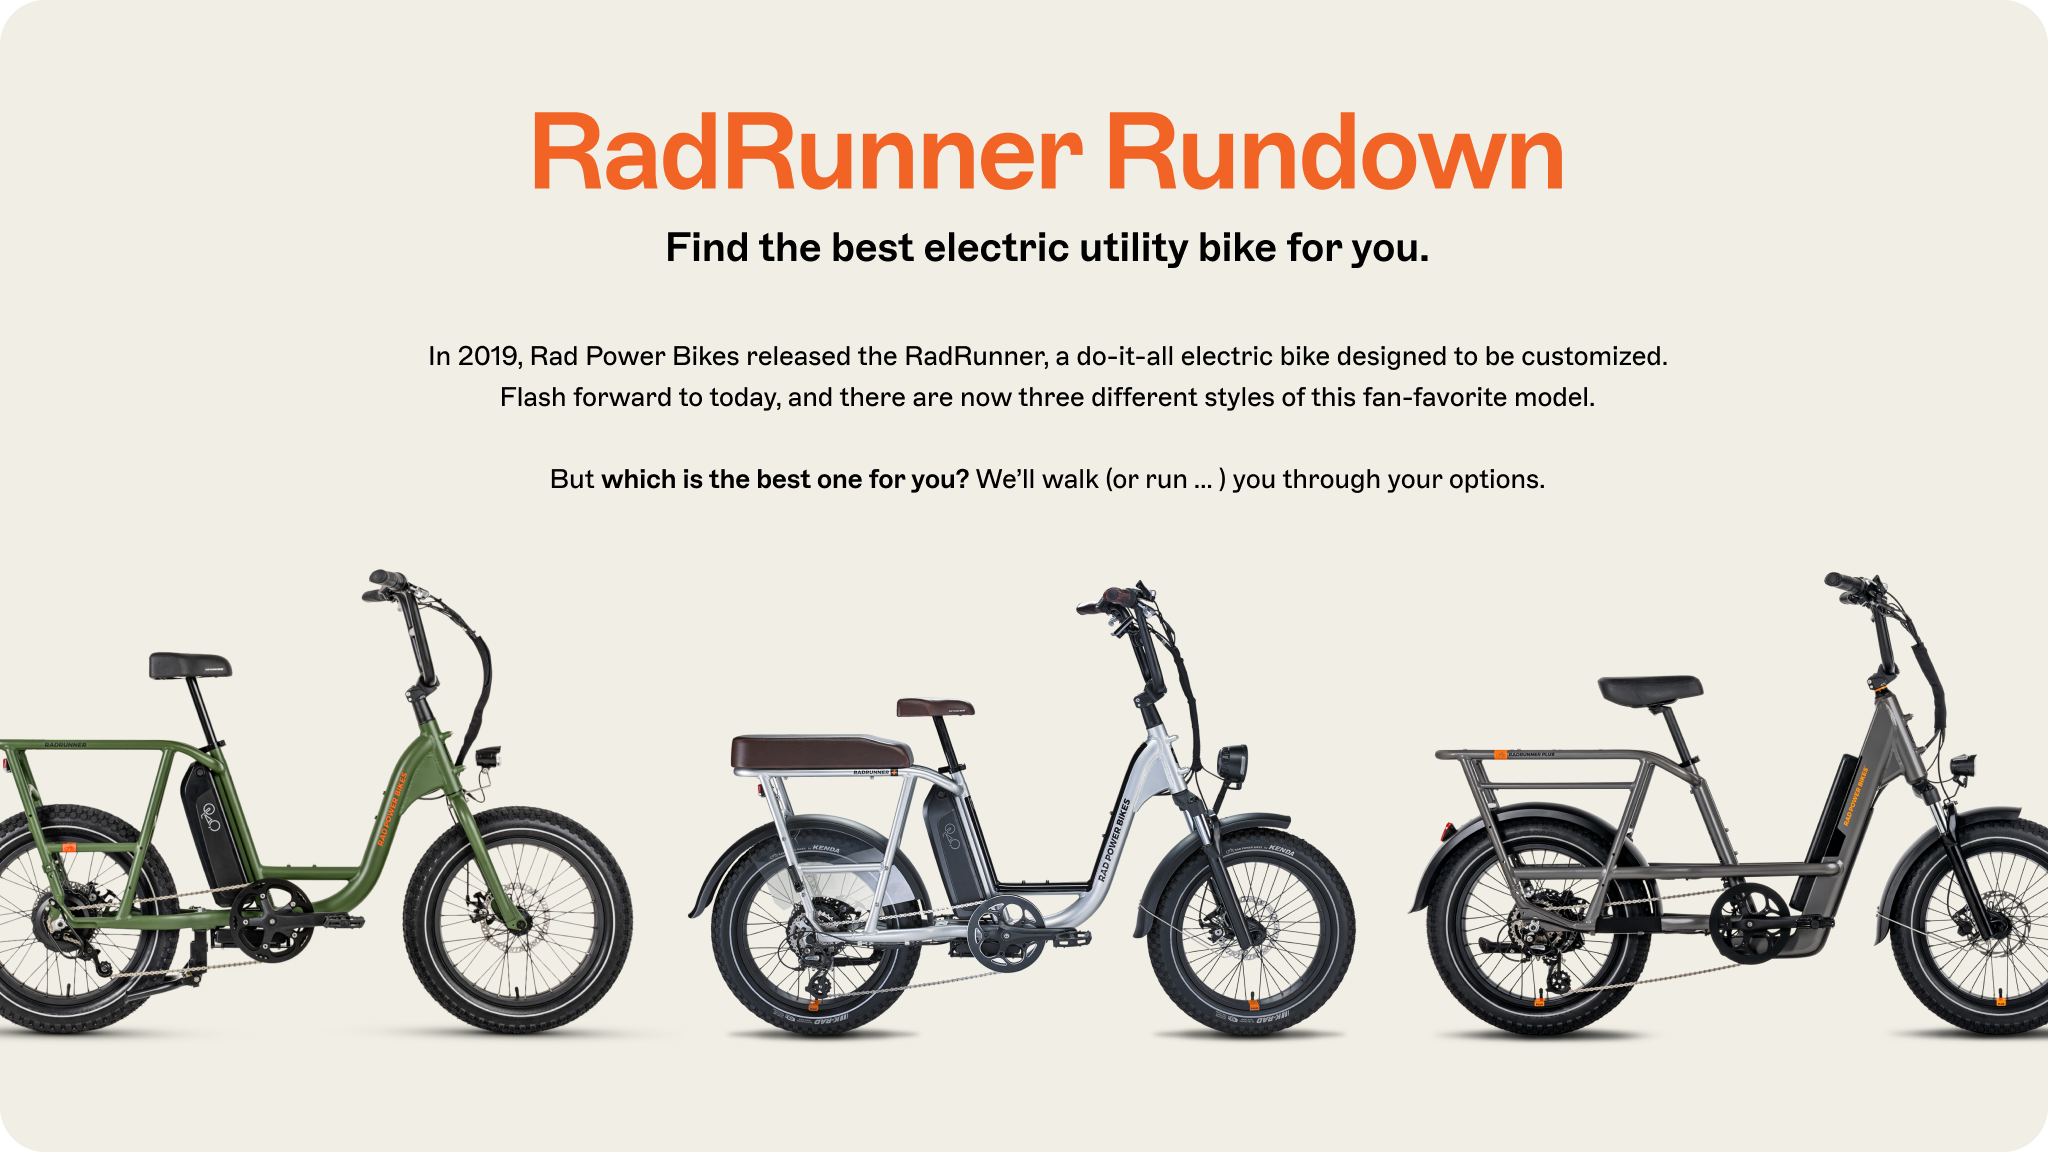 RadRunner Rundown. Find the best electric utility bike for you. In 2019, Rad Power Bikes released the RadRunner, a do-it-all electric bike designed to be customized. Flash forward to today, and there are now three different styles of this fan-favorite model. But which is the best one for you? We'll walk (or run ... ) you through your options.